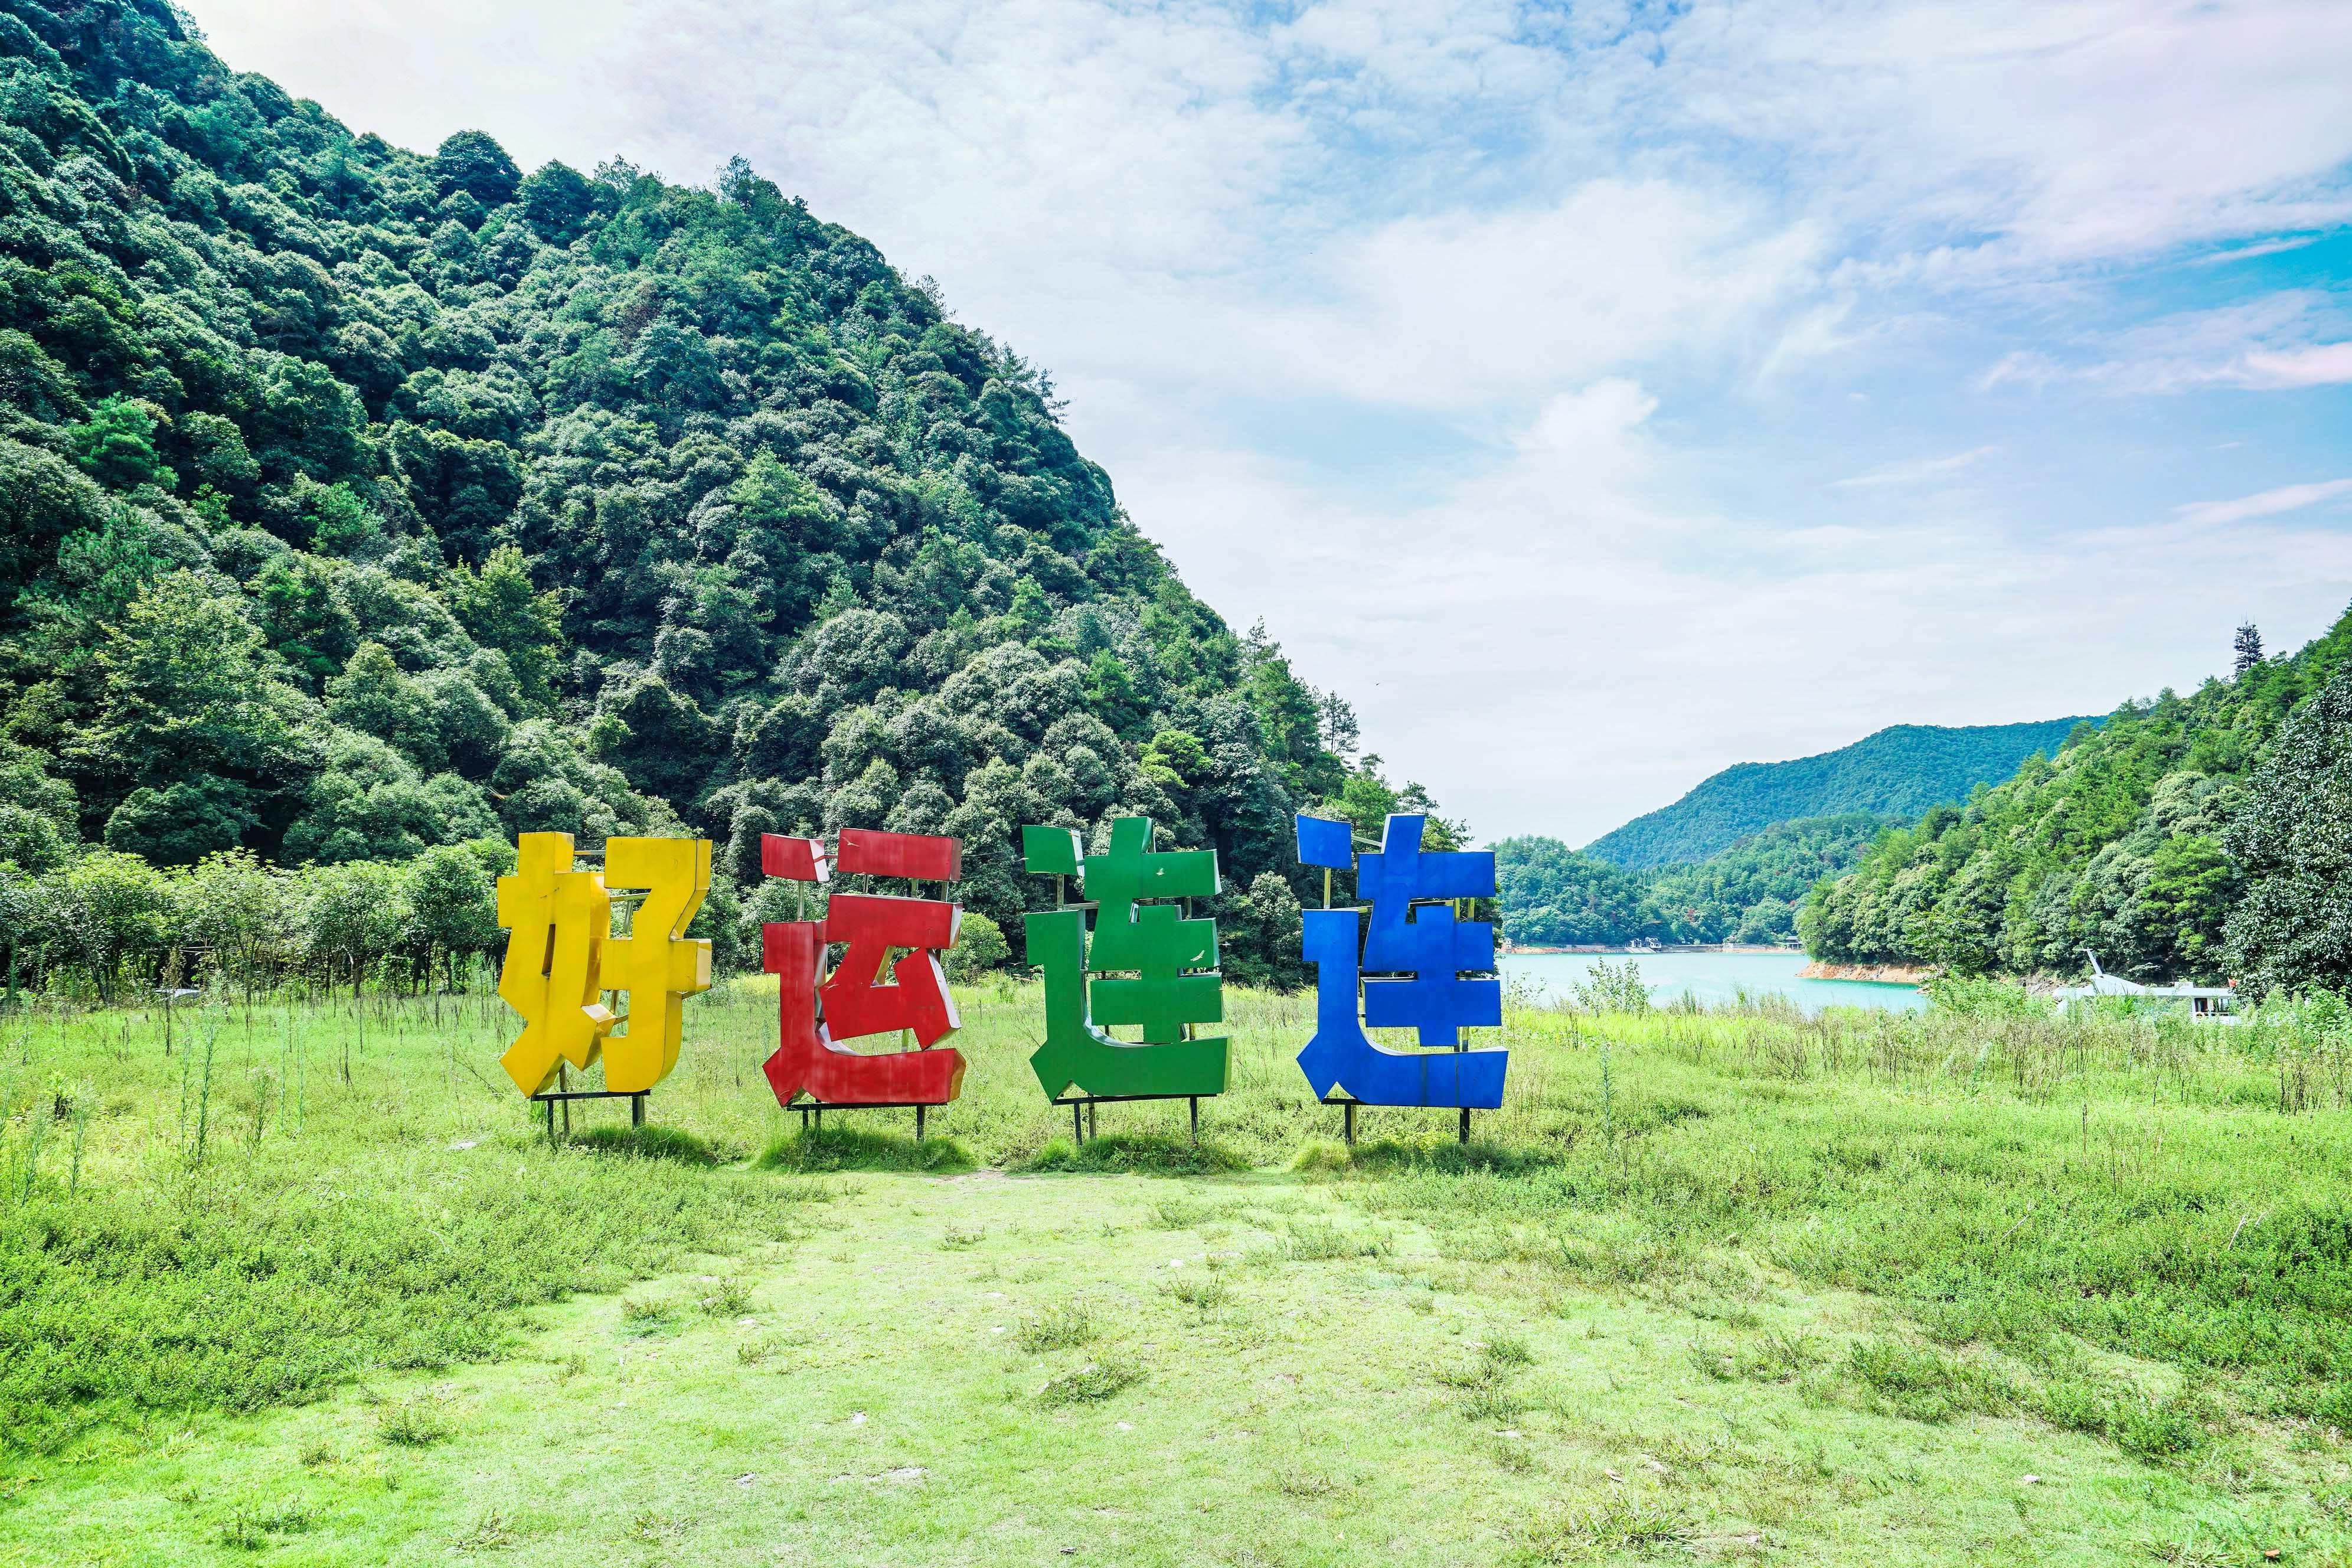 Qiandao Thousand Island Lake Houdao Good Luck Island Travel Guidebook Must Visit Attractions In Jiande Qiandao Thousand Island Lake Houdao Good Luck Island Nearby Recommendation Trip Com